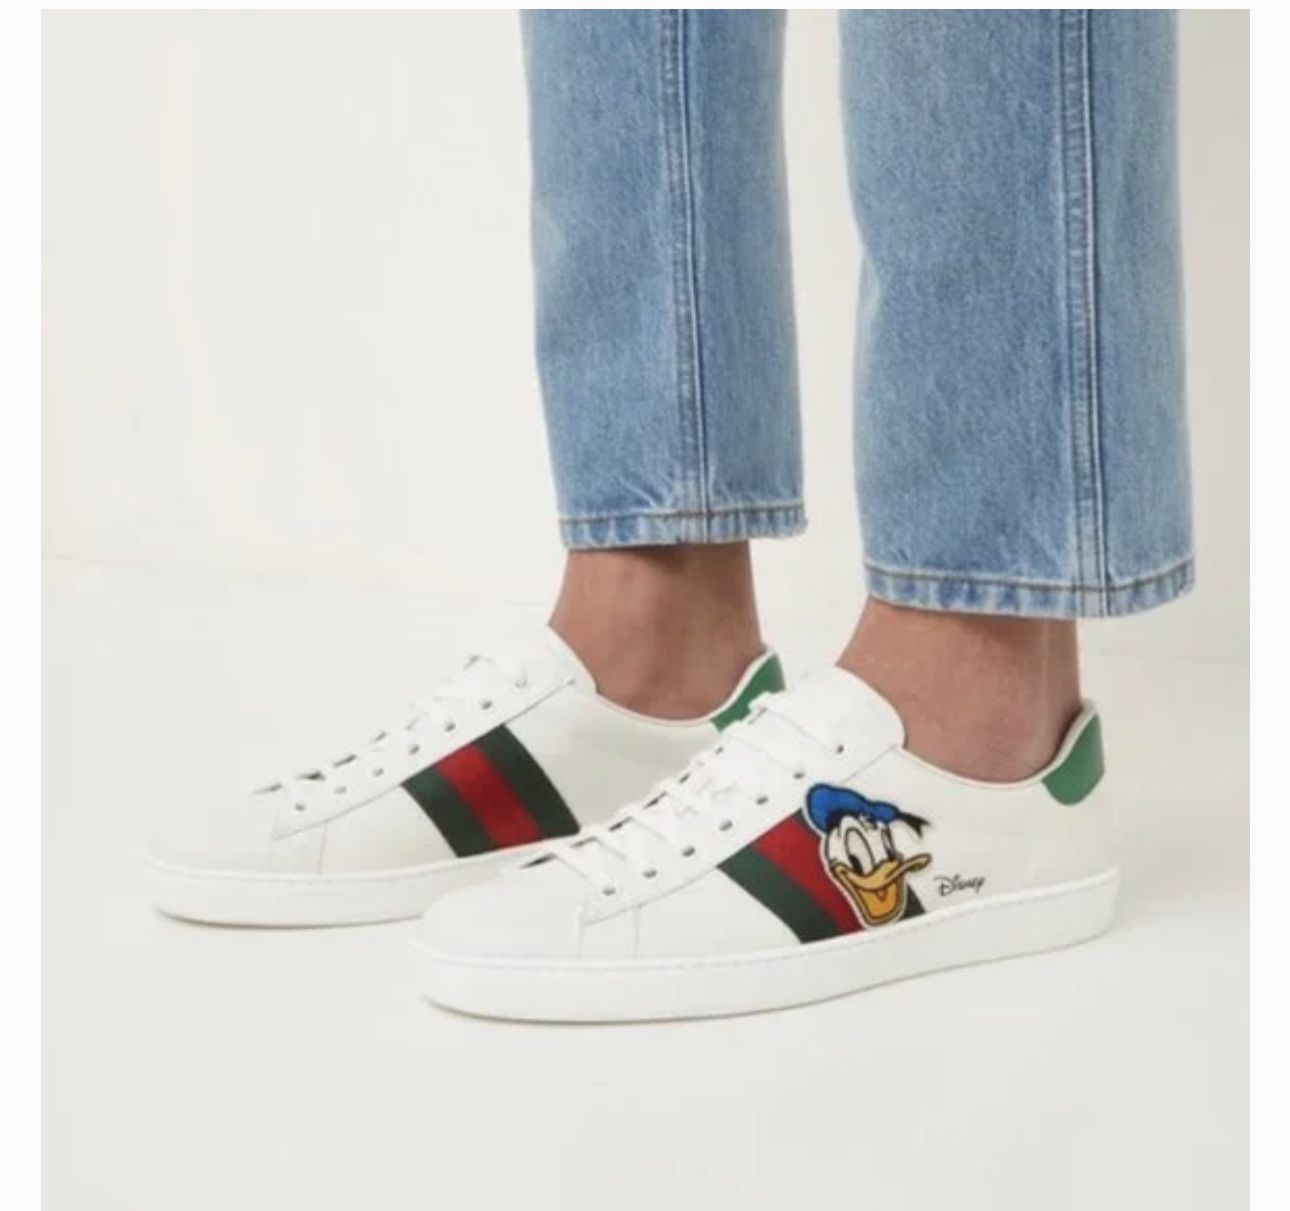  GUCCI DISNEY Ace Leather Donald Duck WEB Signature Sneakers